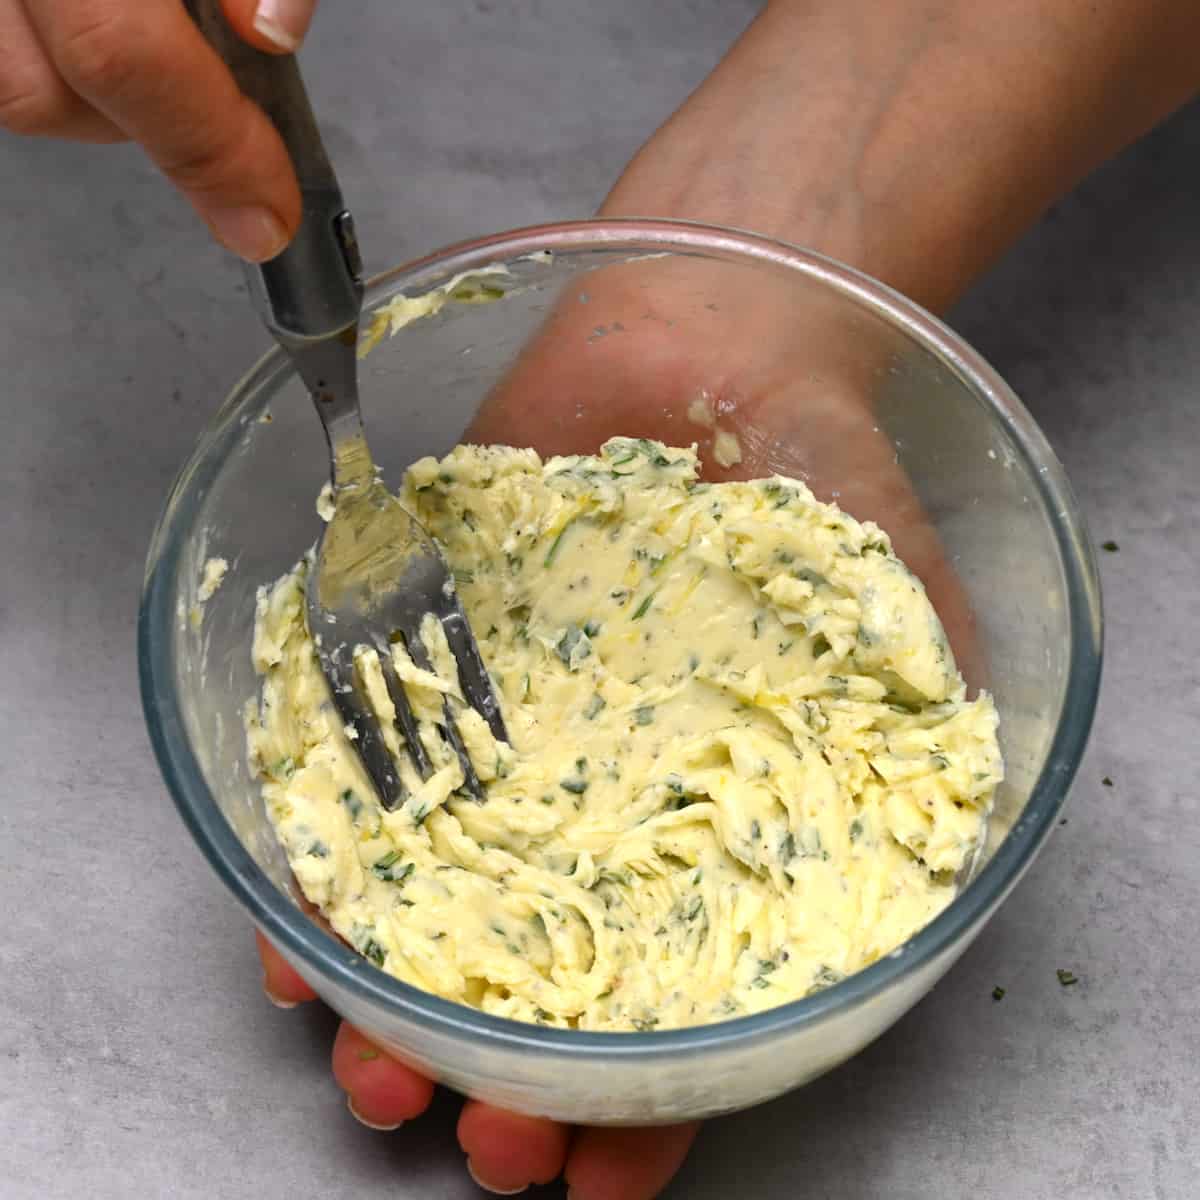 Mixing the butter herb mixture with fork